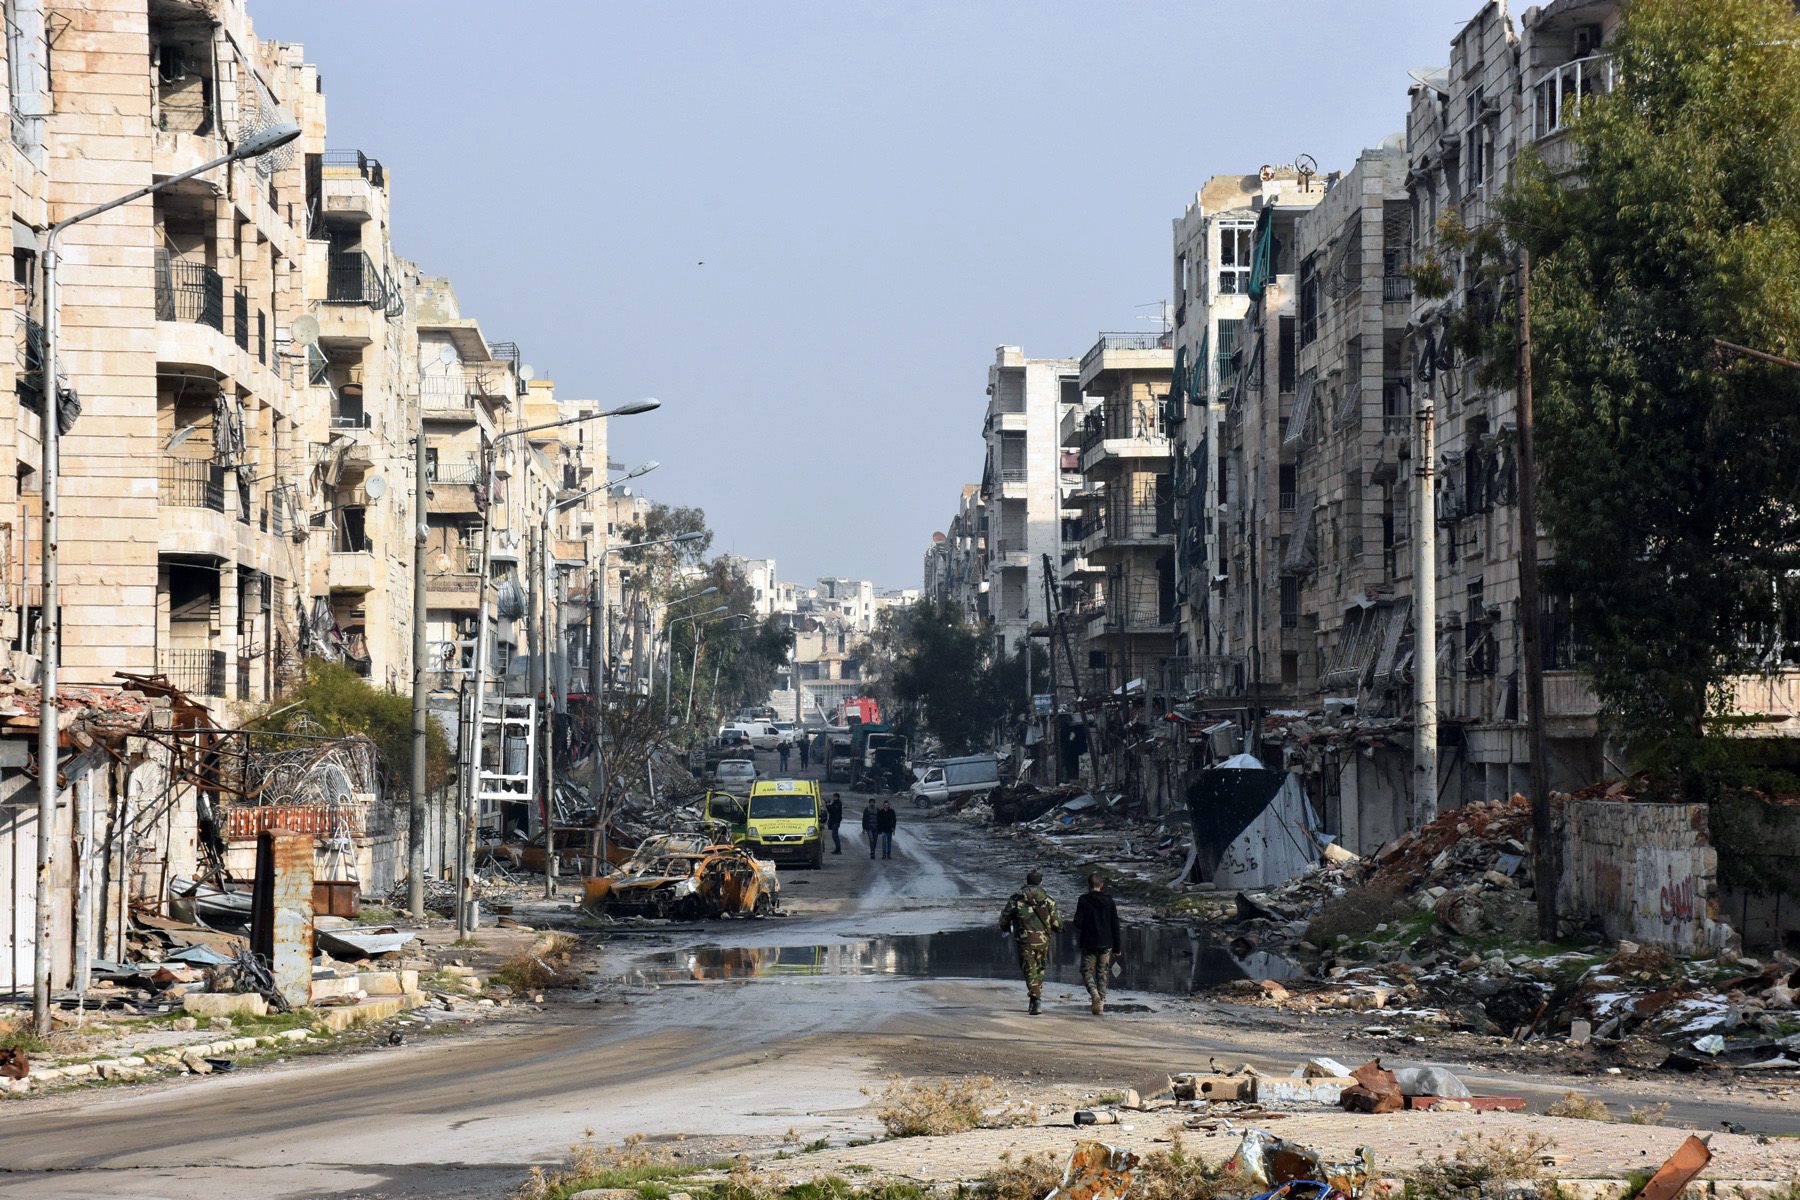 epa05688004 A handout photo made available by official Syrian Arab News Agency (SANA) shows destruction in Zabadia and Salah Eddin district in Aleppo, Syria, 23 December 2016 (issued 25 December 2016). The Syrian General Command of the Army and the armed forces on 22 December 2016 announced the return of security and safety to the city of Aleppo after its liberation.  EPA/SANA / HANDOUT ATTENTION EDITORS: EPA IS USING AN IMAGE FROM AN ALTERNATIVE SOURCE AND CANNOT PROVIDE CONFIRMATION OF CONTENT, AUTHENTICITY, PLACE, DATE AND SOURCE. HANDOUT EDITORIAL USE ONLY/NO SALES SYRIA CONFLICT ALEPPO